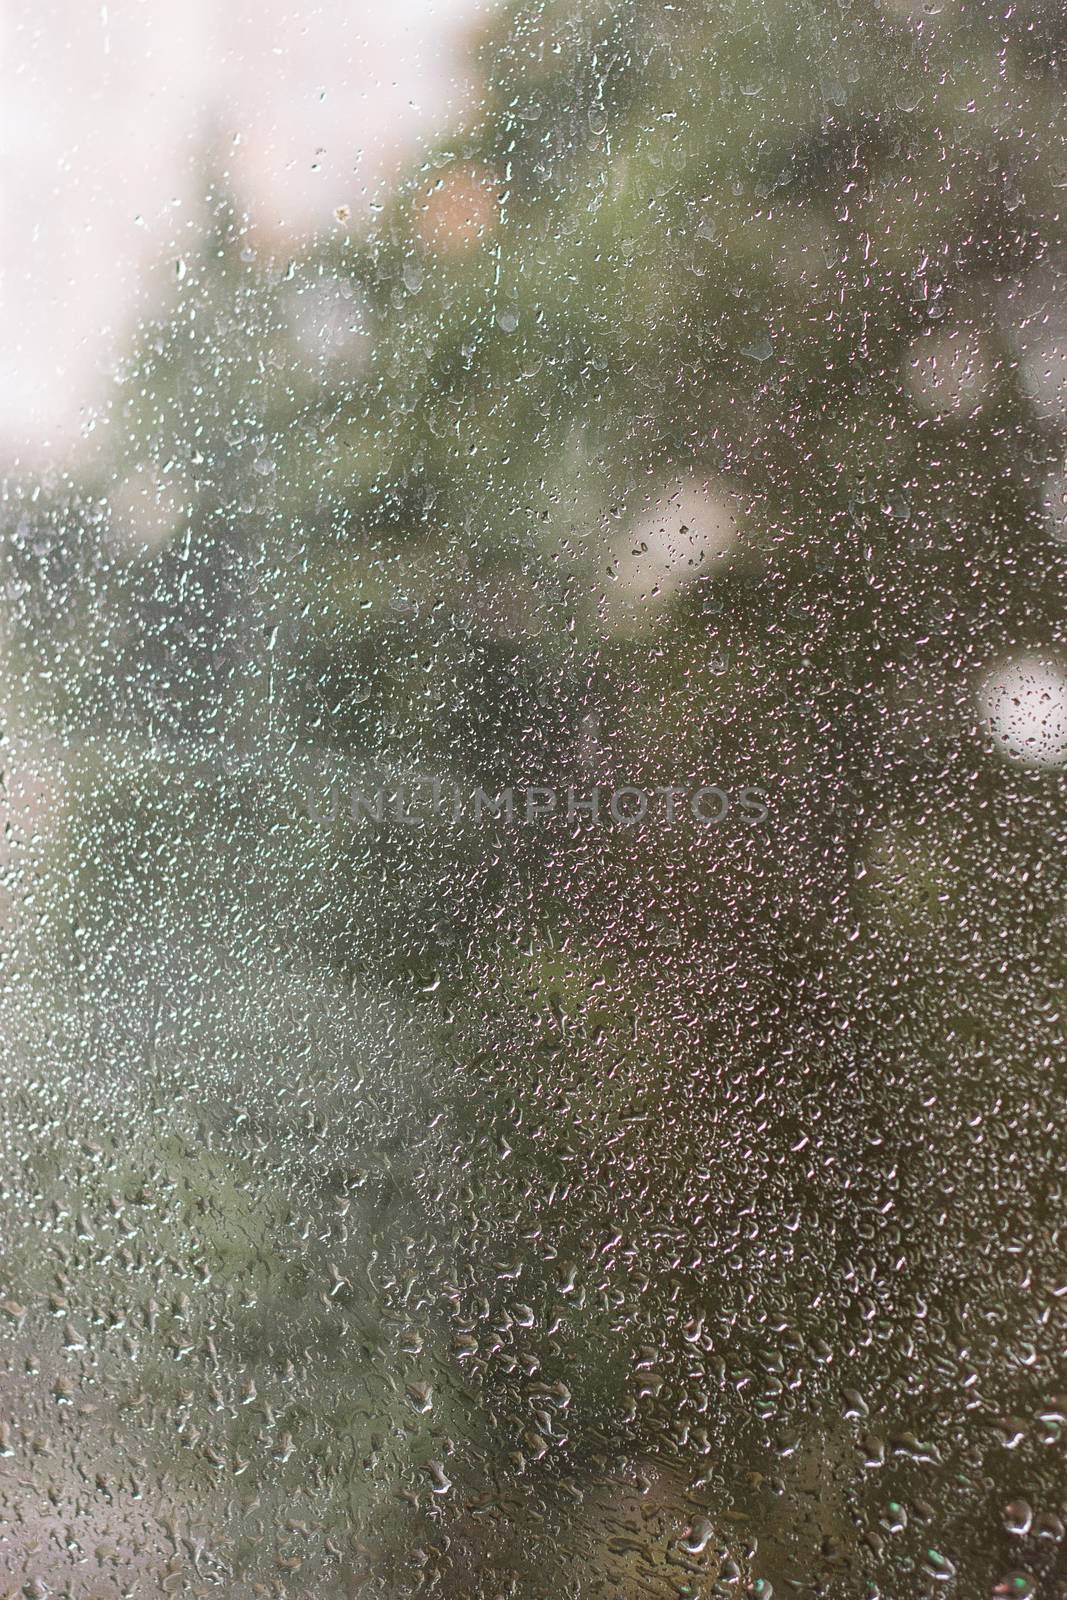 Drops of rain on the window behind the glass green trees